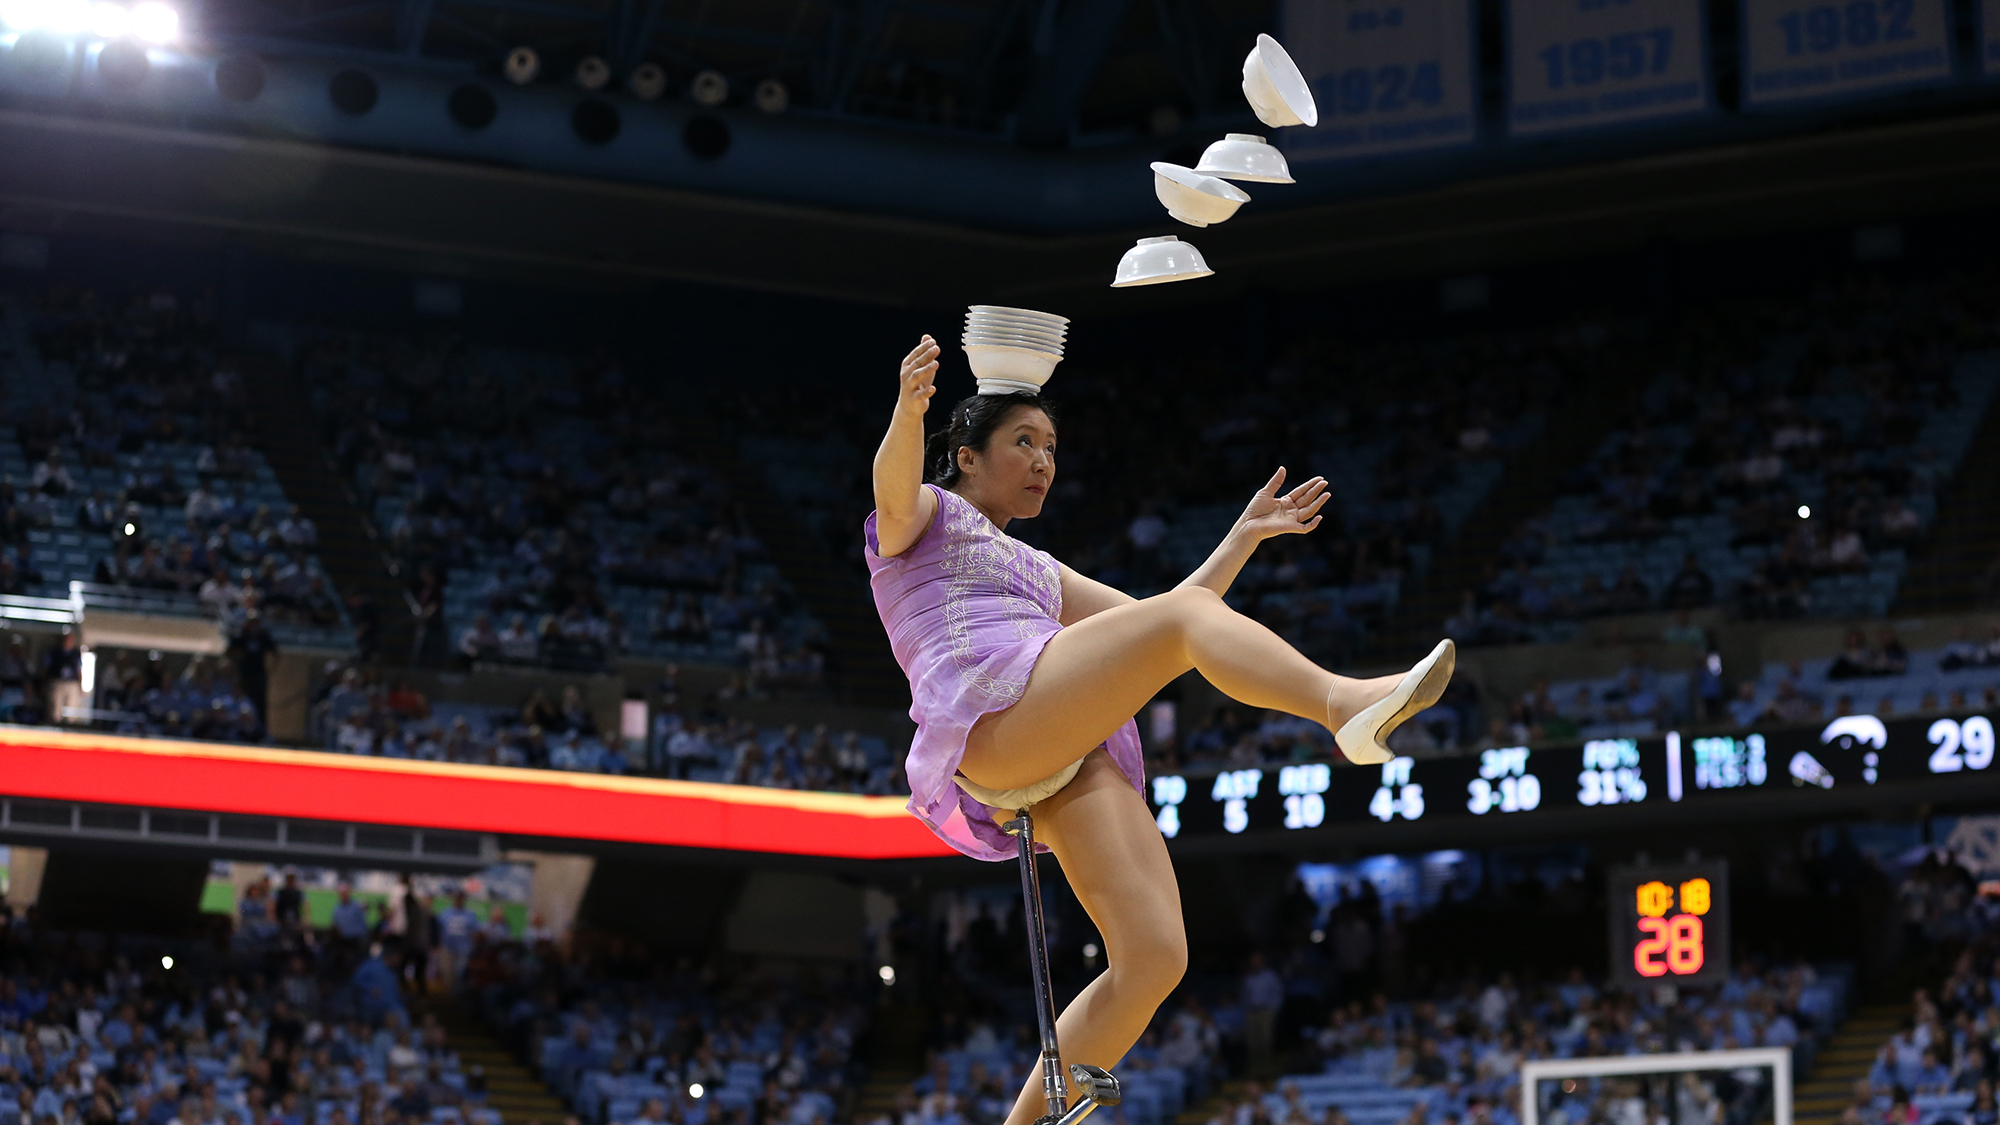 Red Panda's 7-foot custom unicycle was stolen - Sports Illustrated